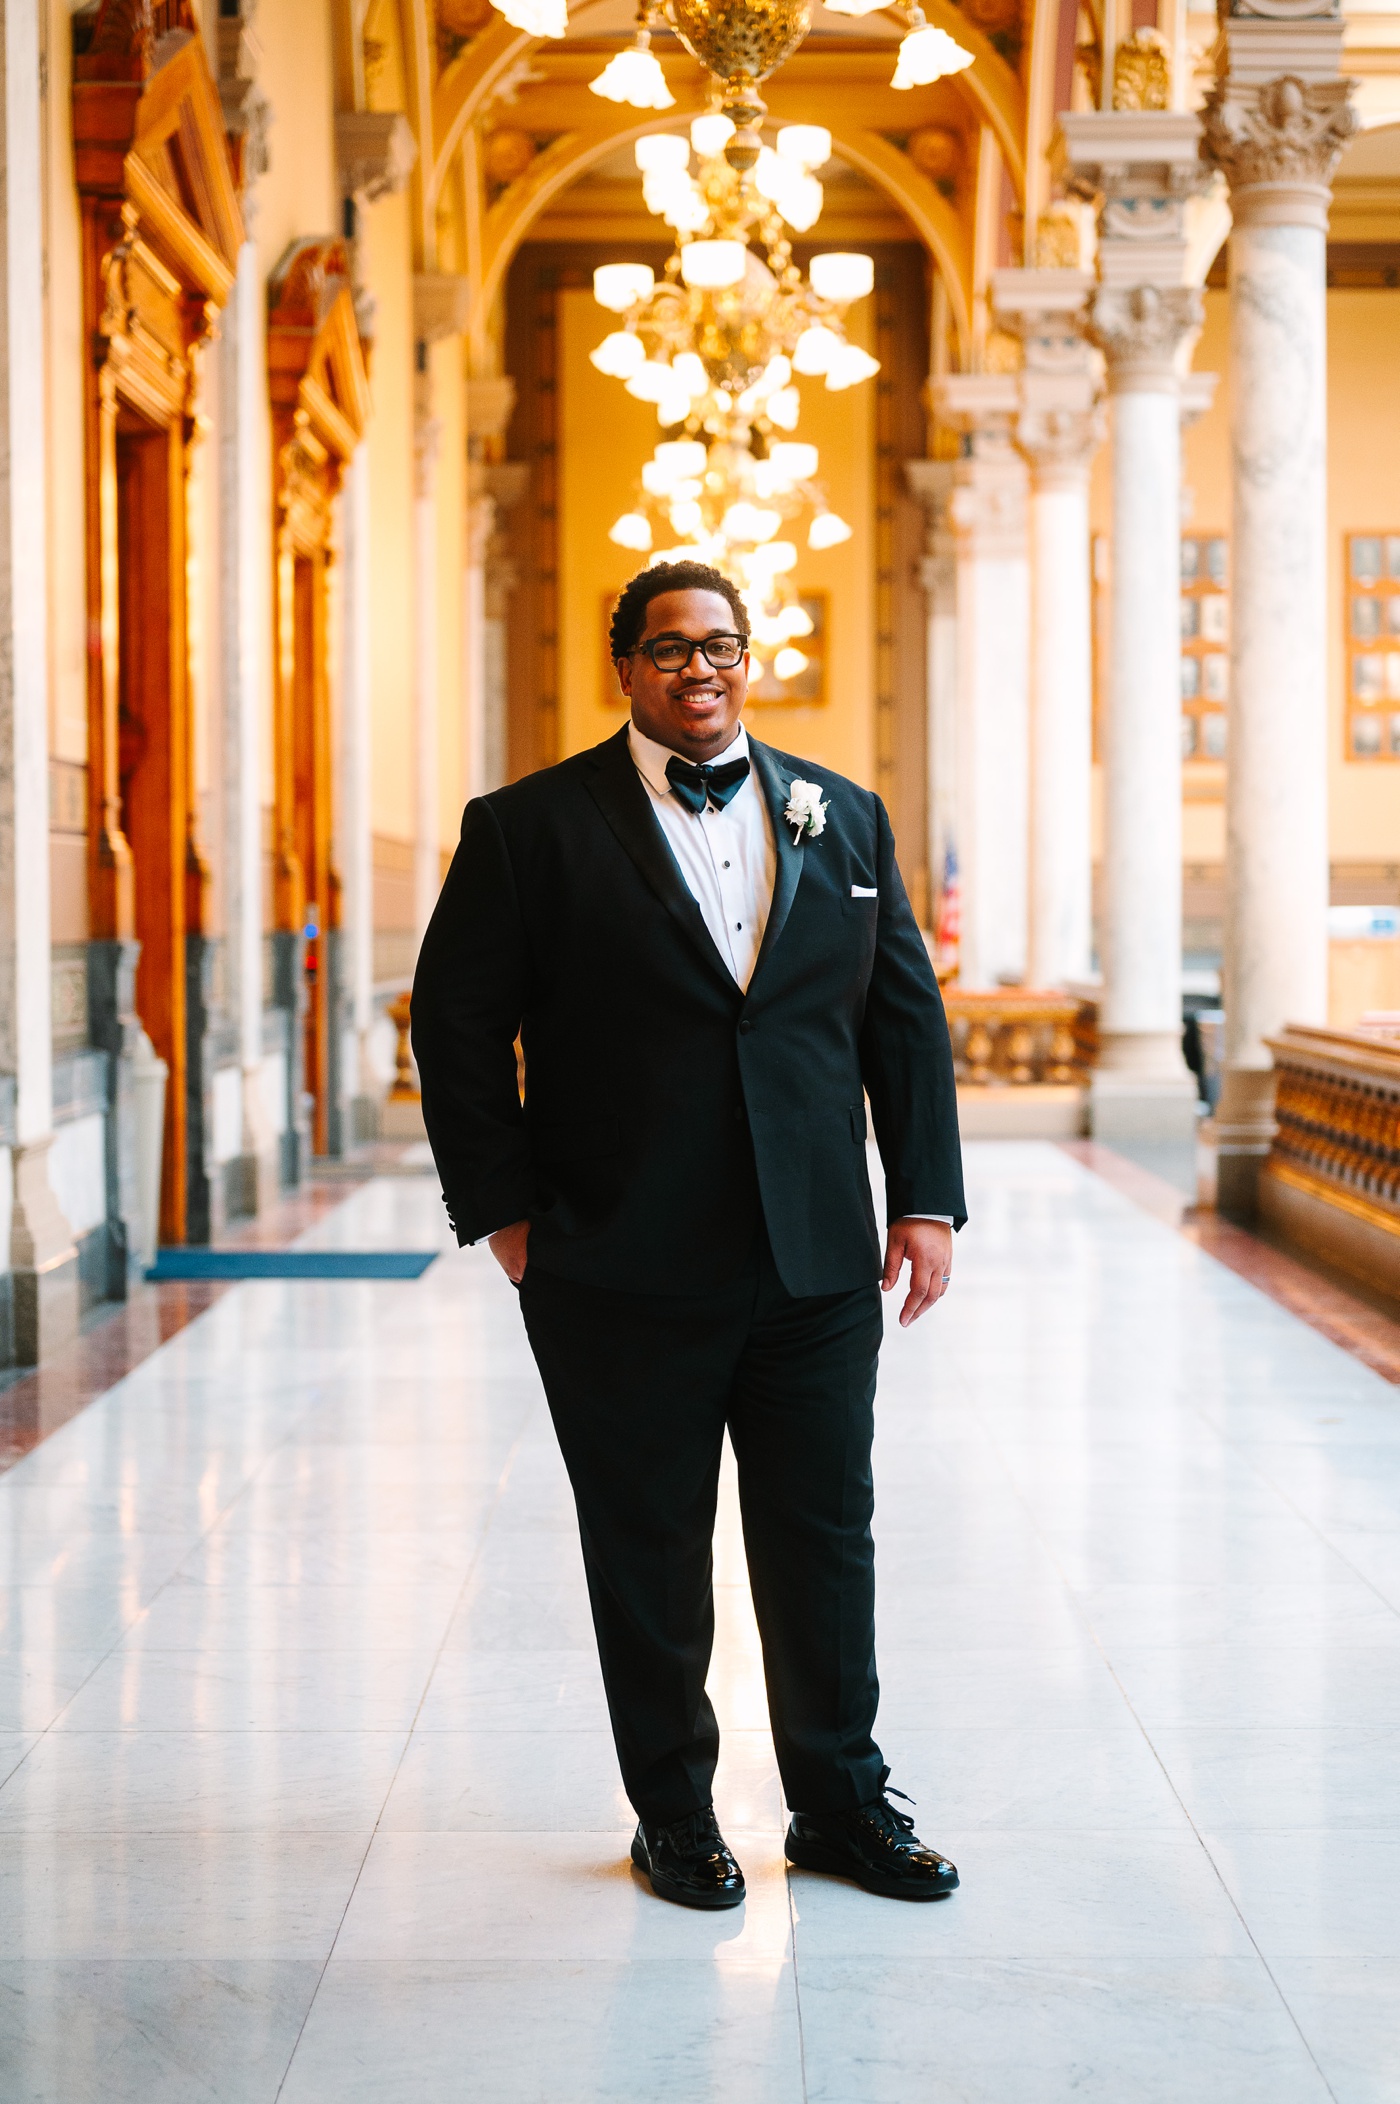 Bridal portraits at the Indiana Statehouse